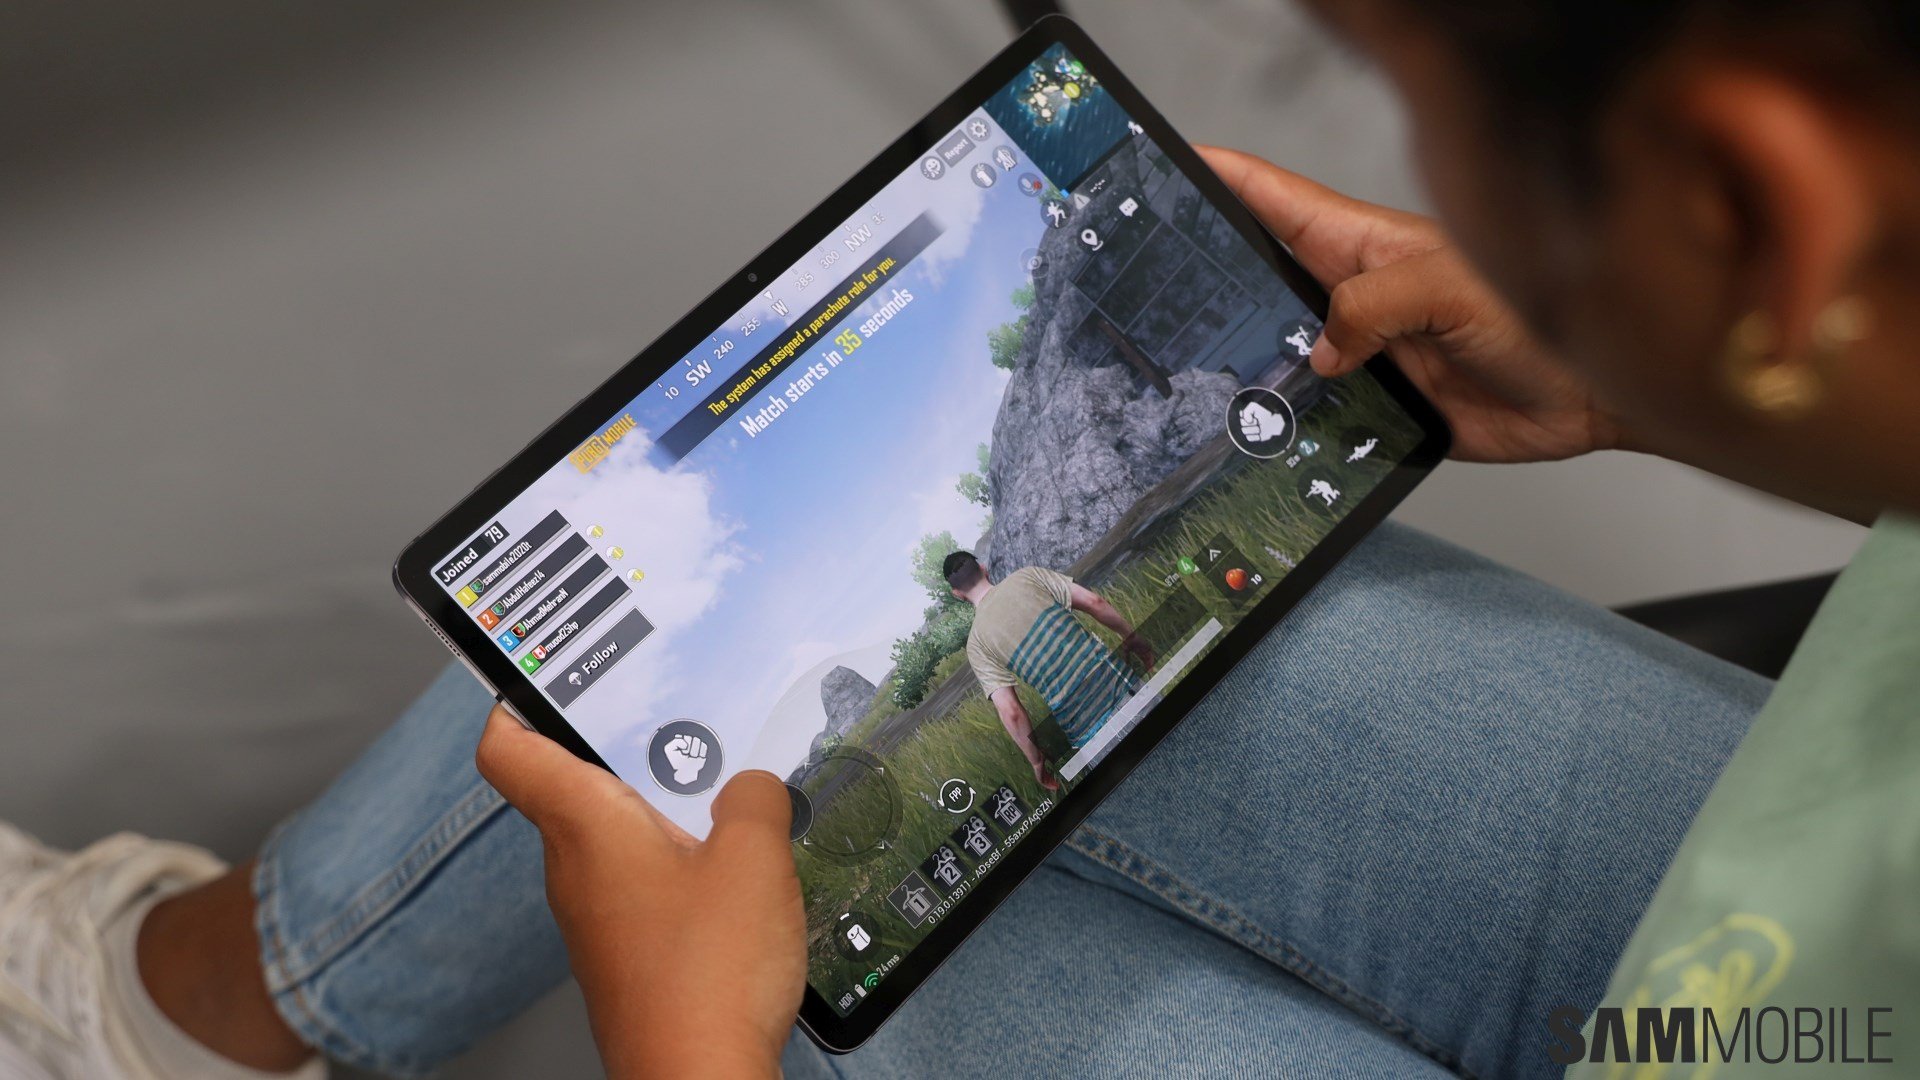 Samsung Galaxy Tab S7 Plus wants to work hard and play games - CNET